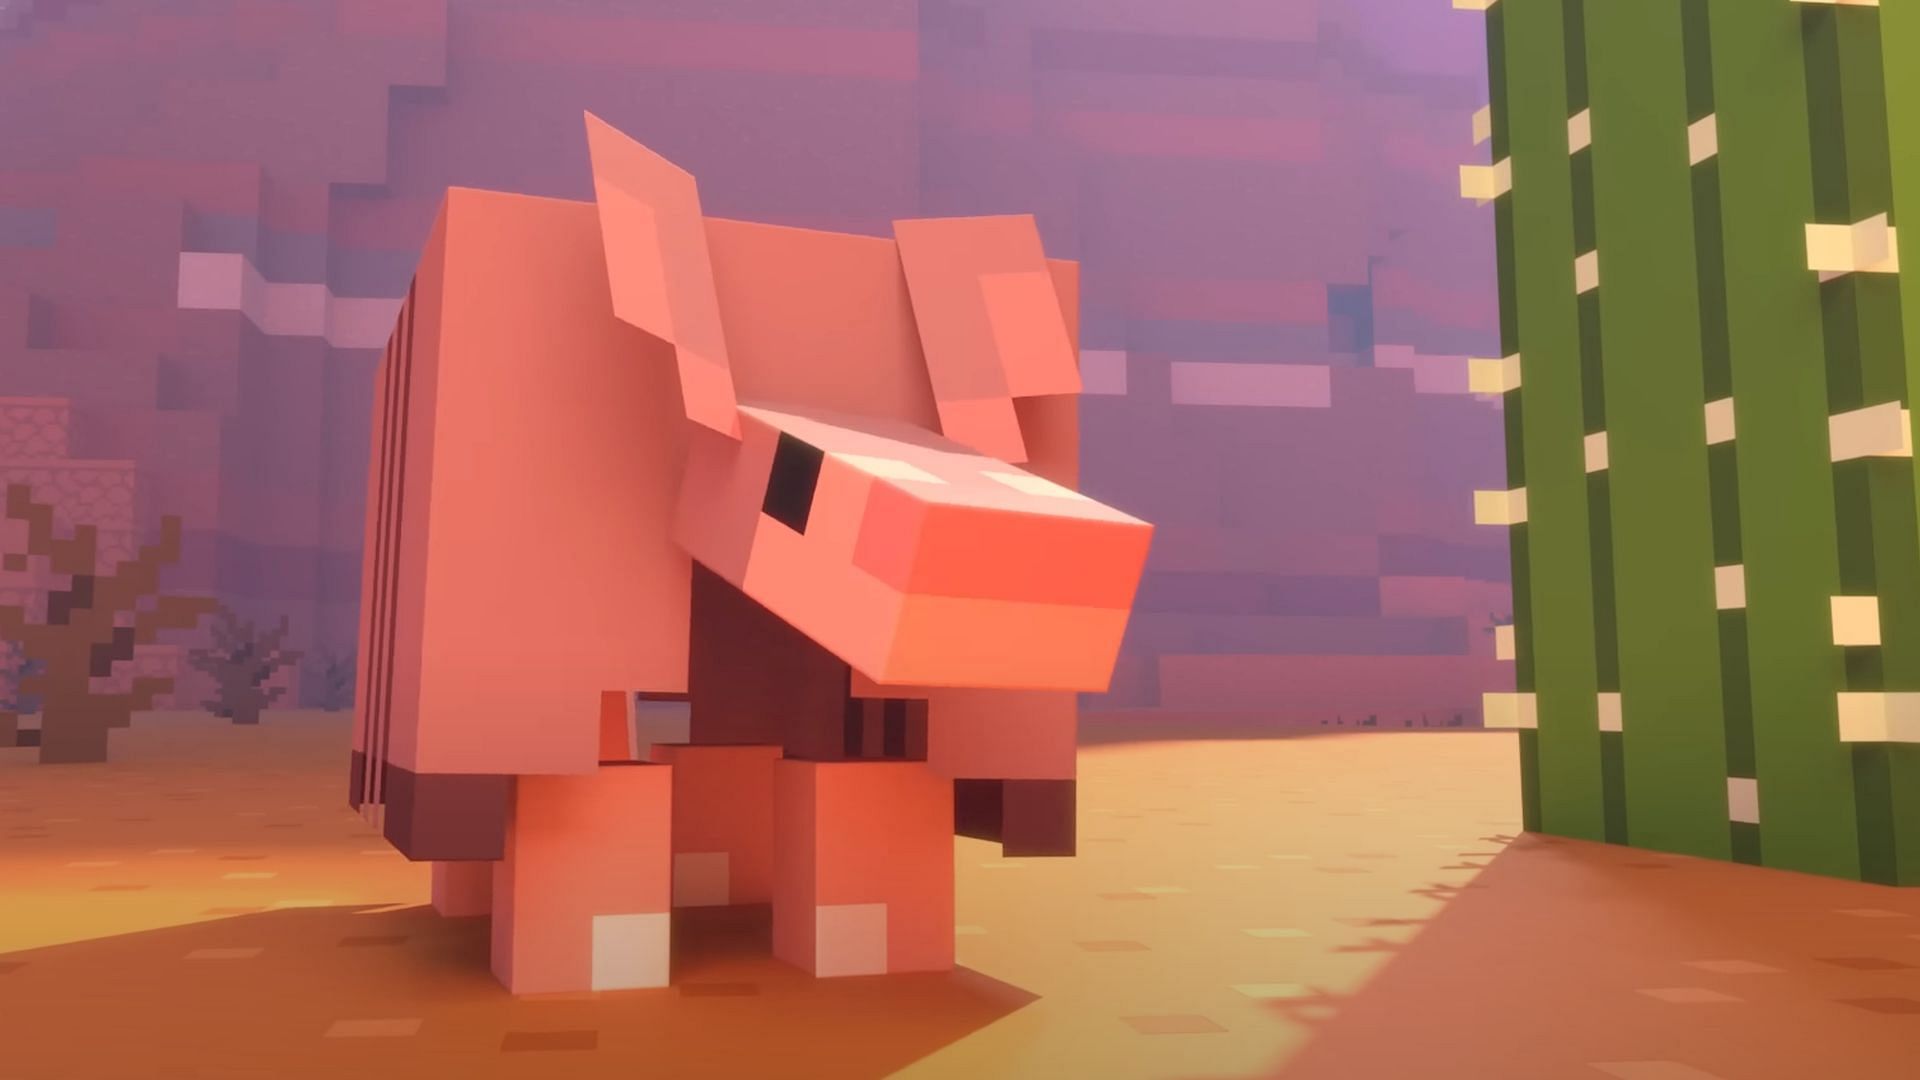 Having an official video is also very unique for a minor update (Image via Mojang)